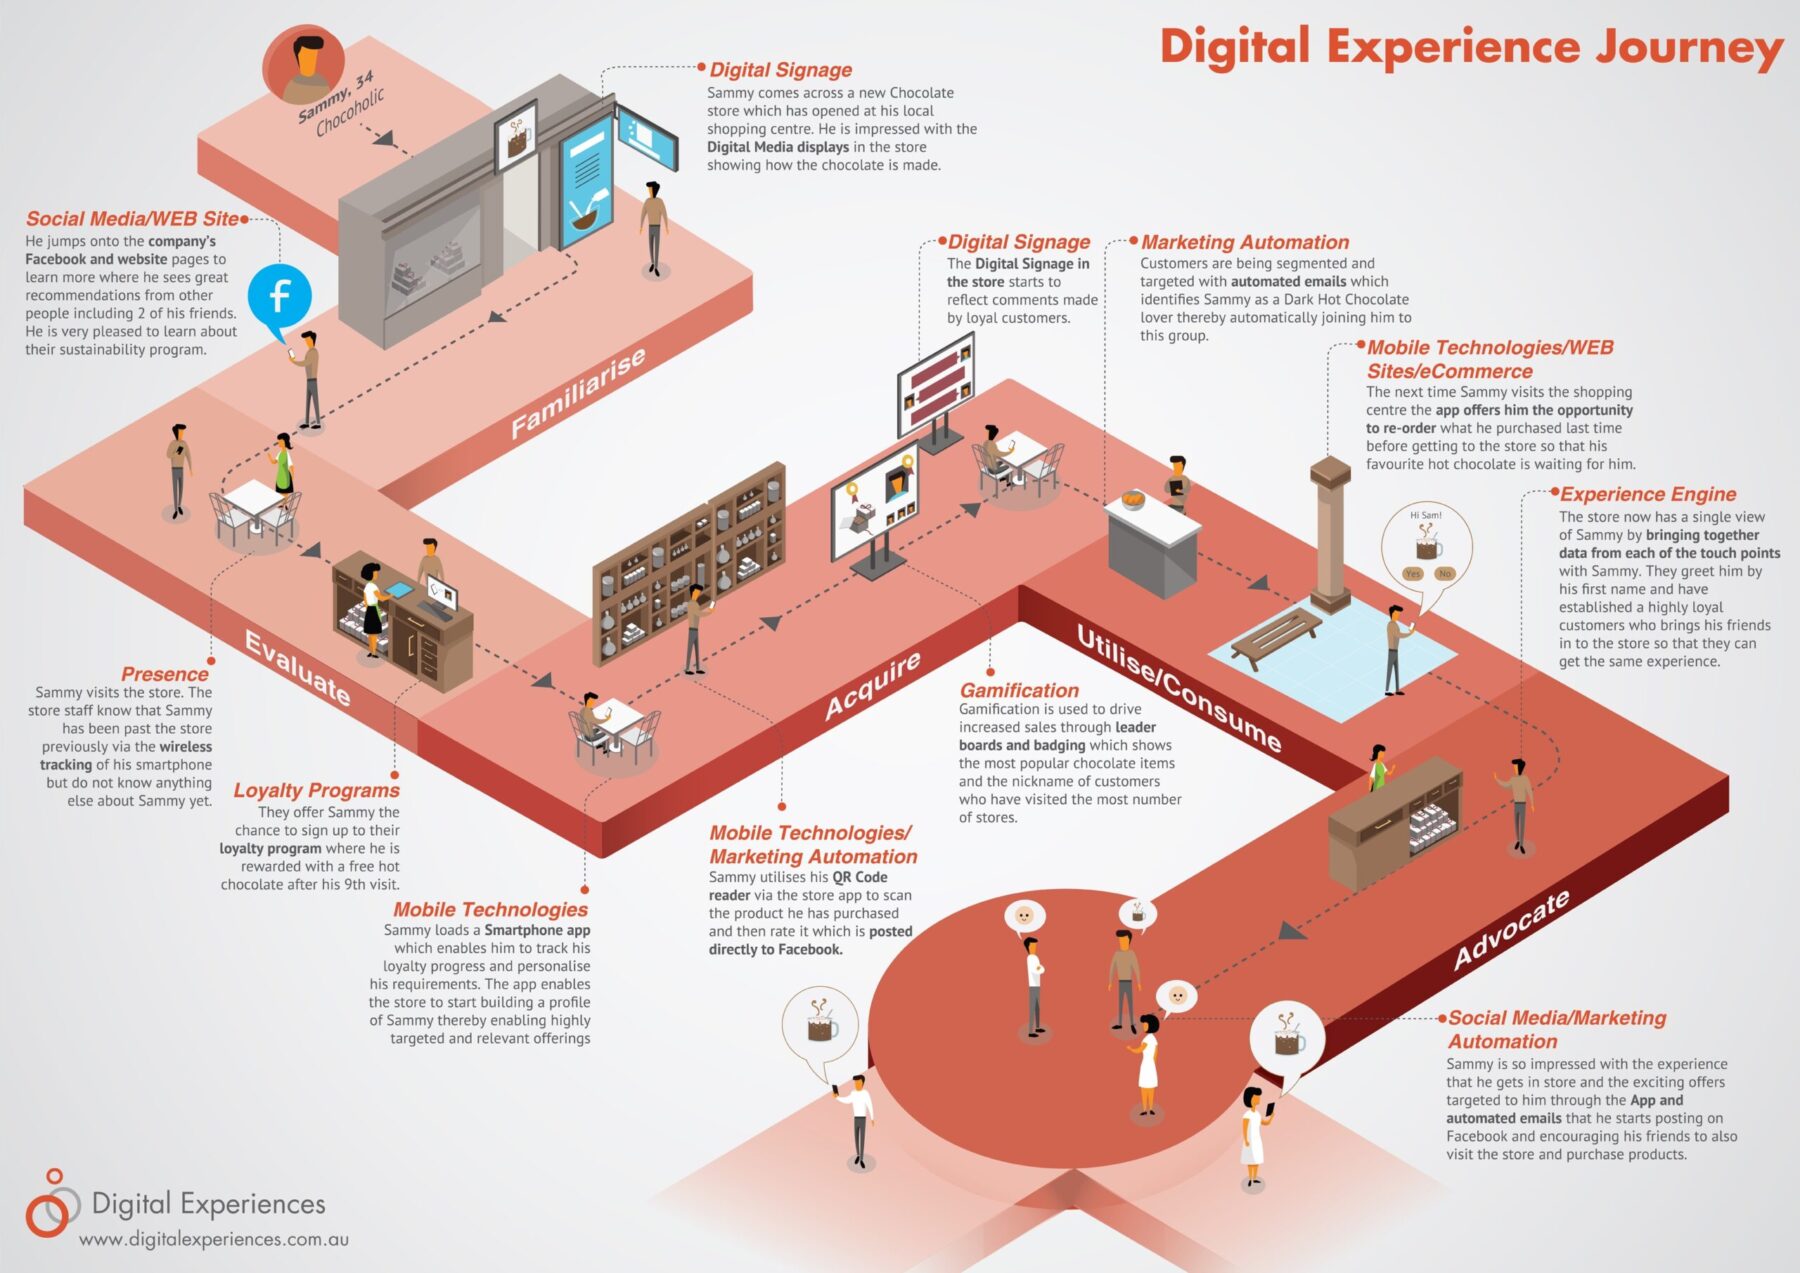 Customer experience journey mapping for retail digital transformation